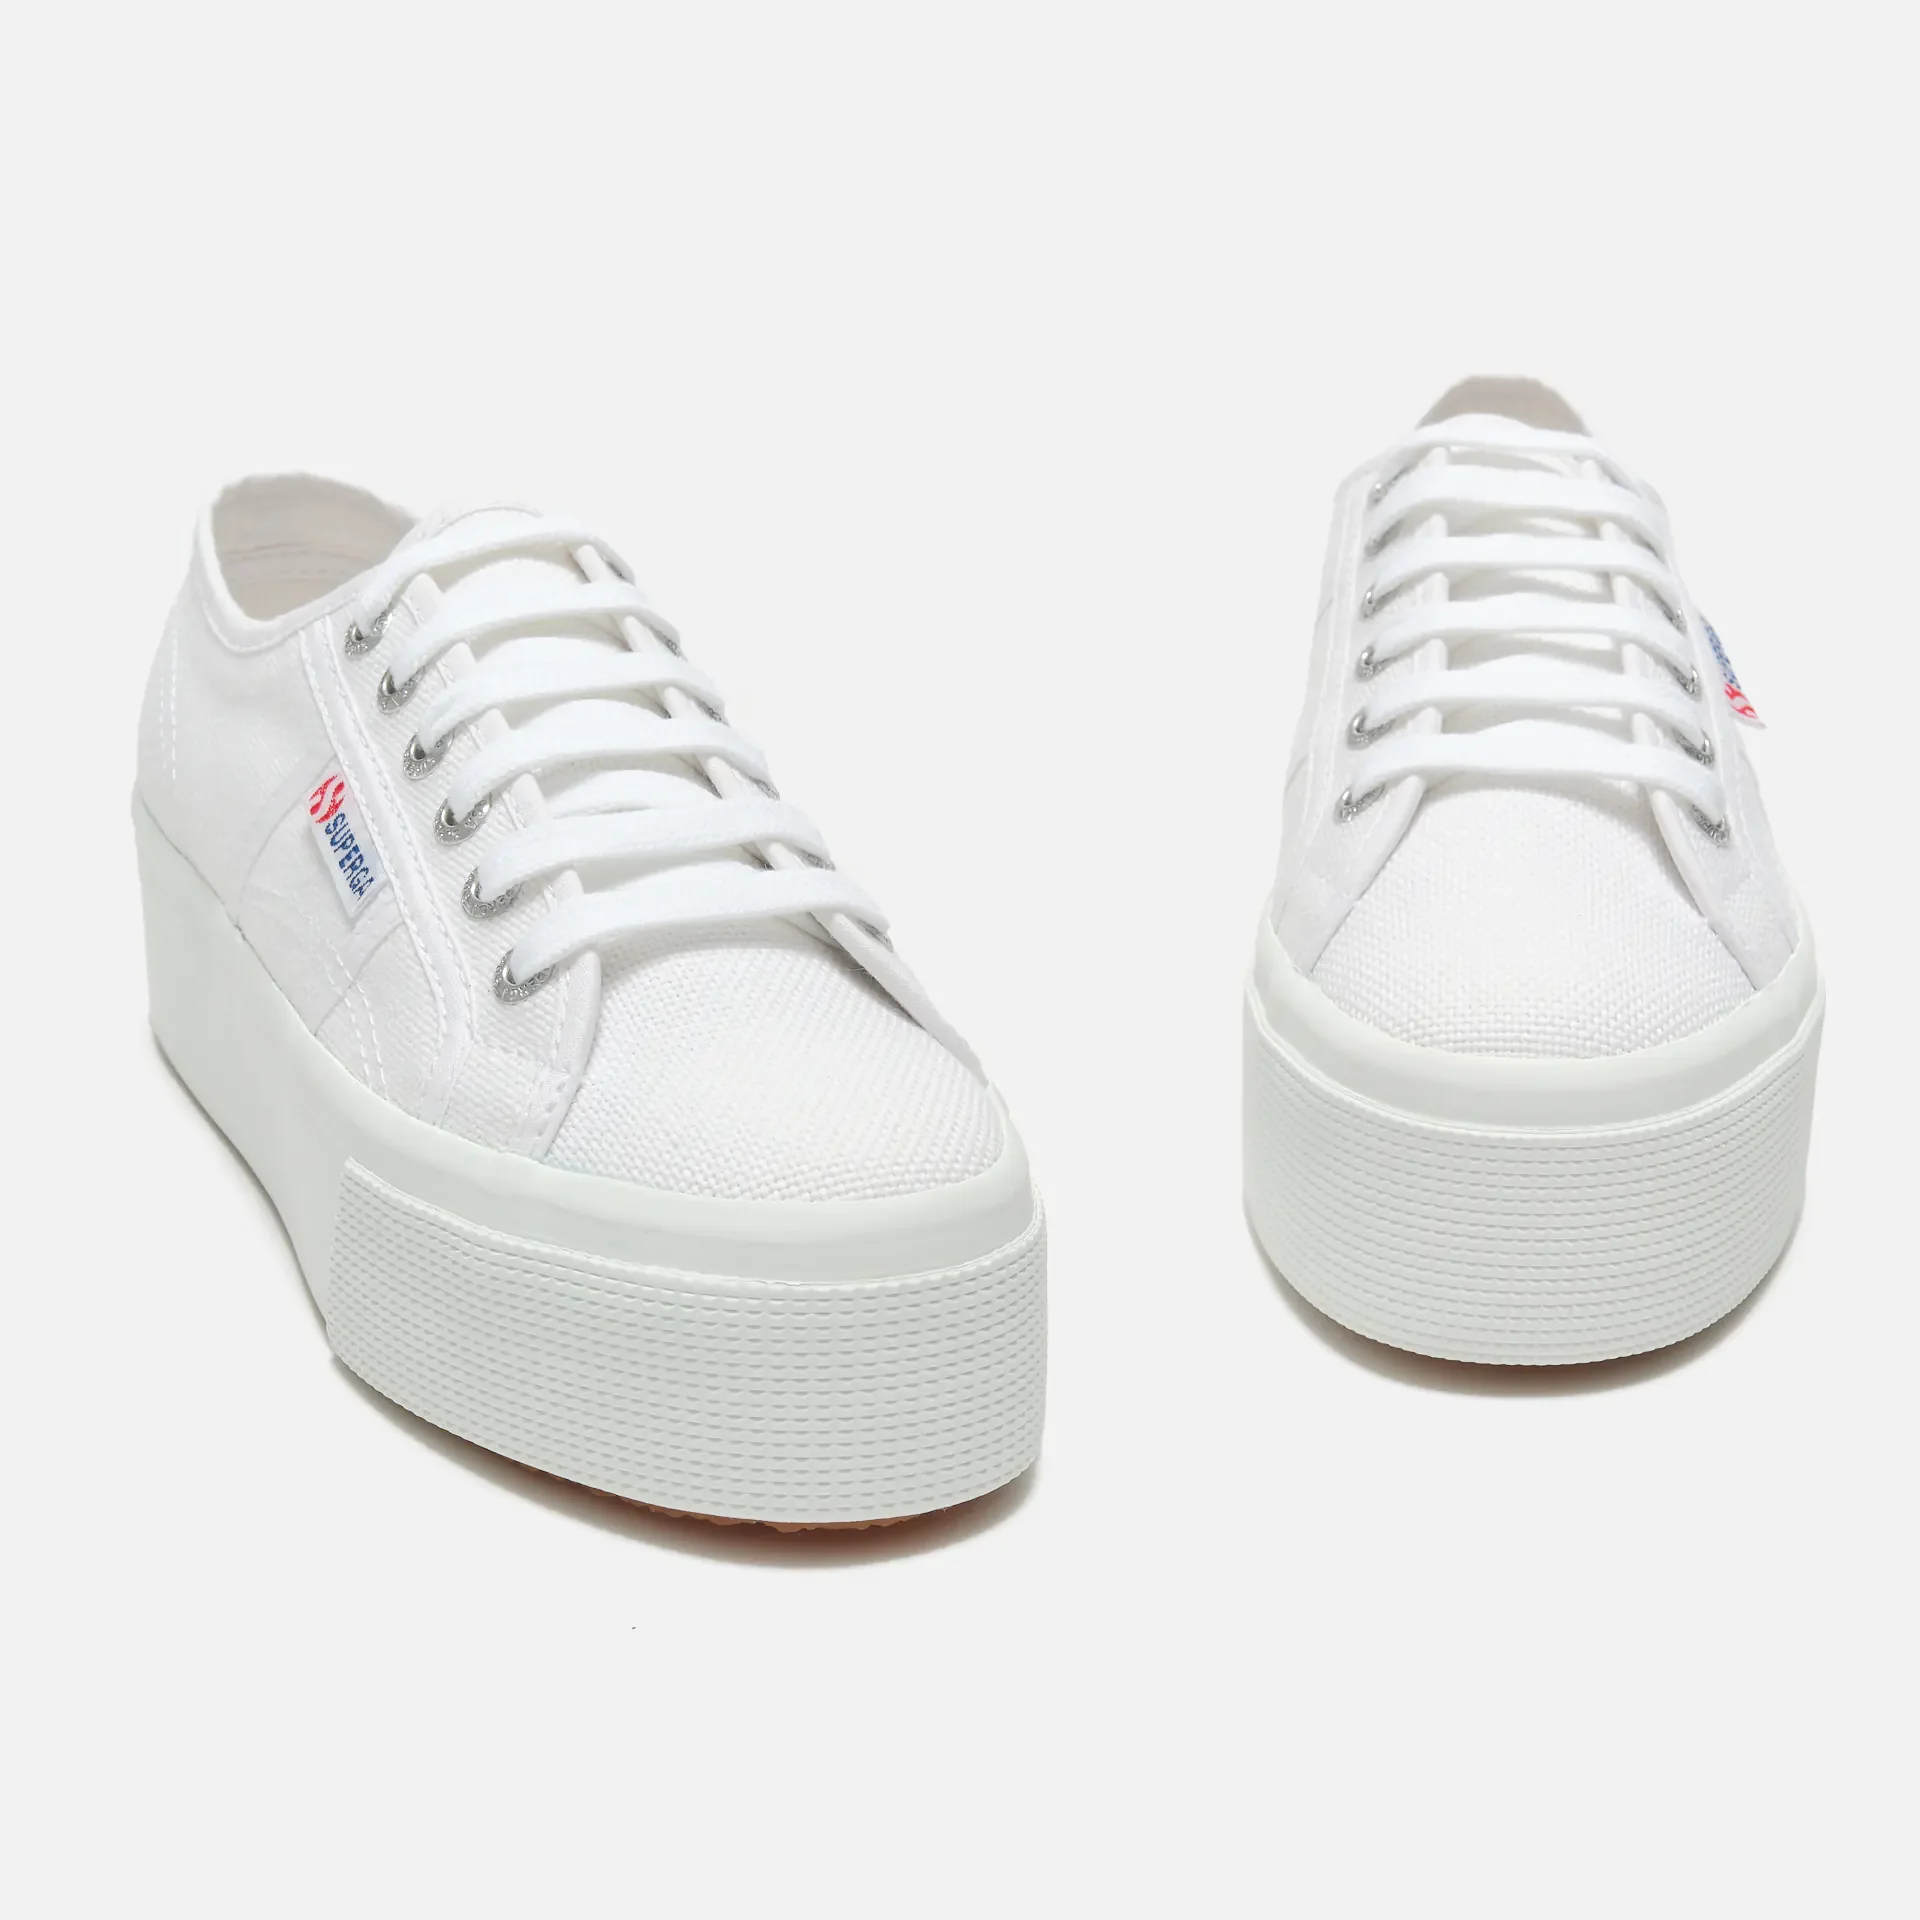 Superga 2790 Cotu Linea Up And Down Sneaker White